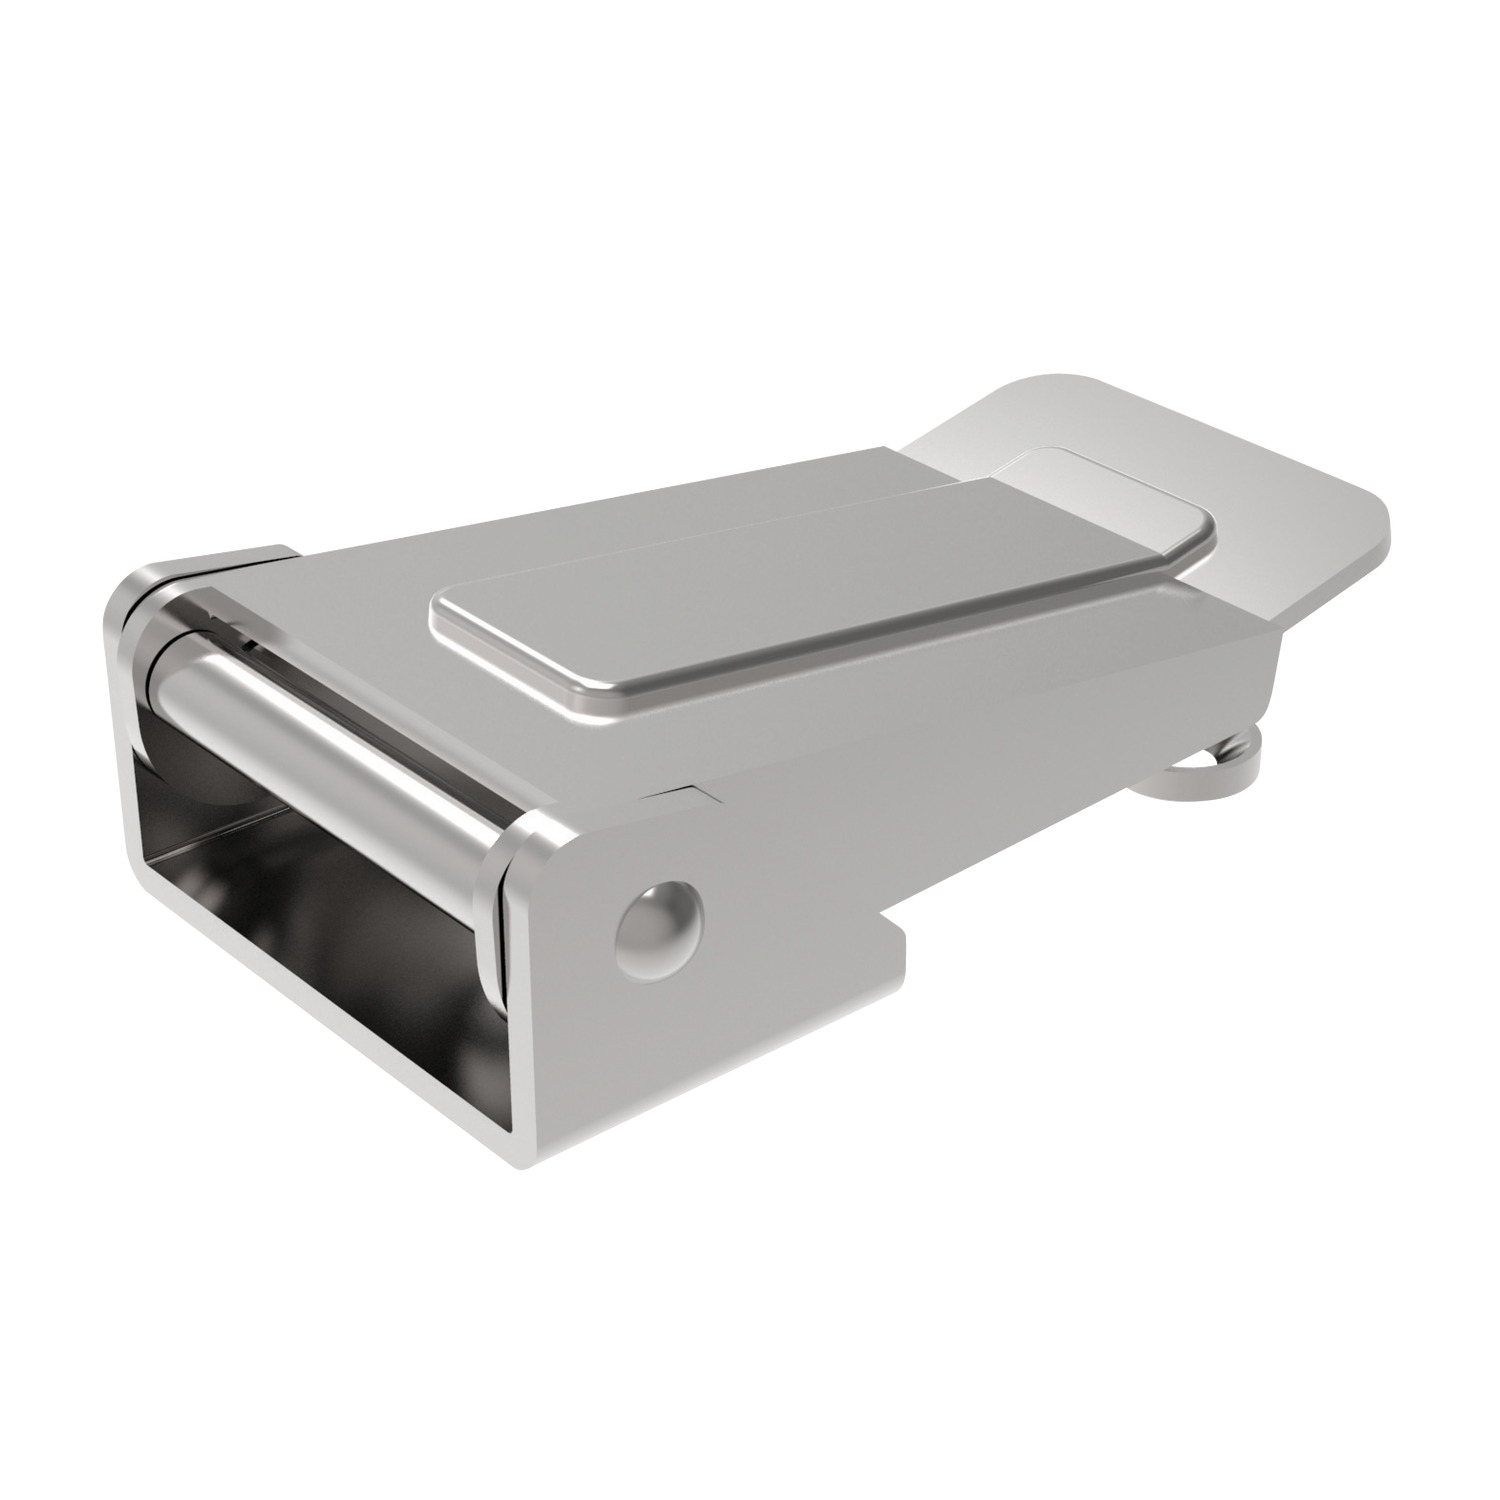 J0560.AC0004 Toggle Latches Zinc Plated Steel - 88 - 26 - 48,5